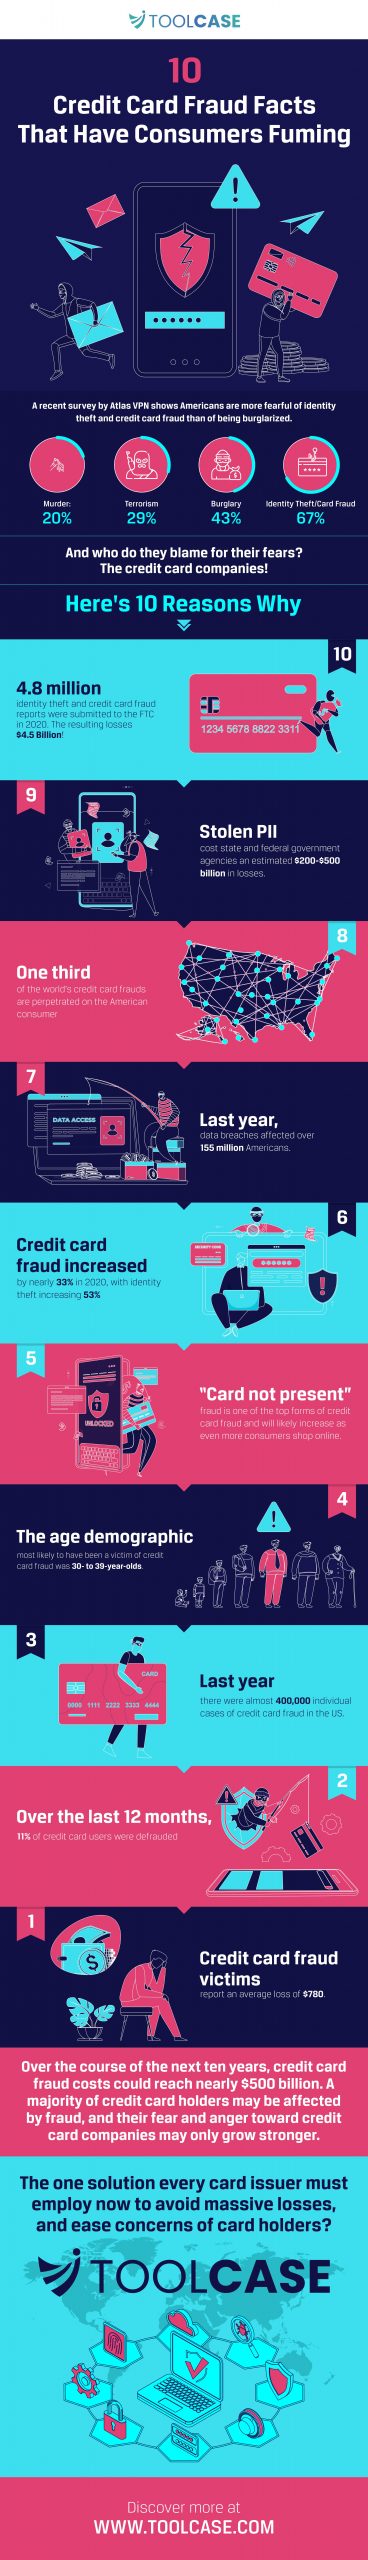 10 Credit Card Fraud Facts That Have Consumers Fuming